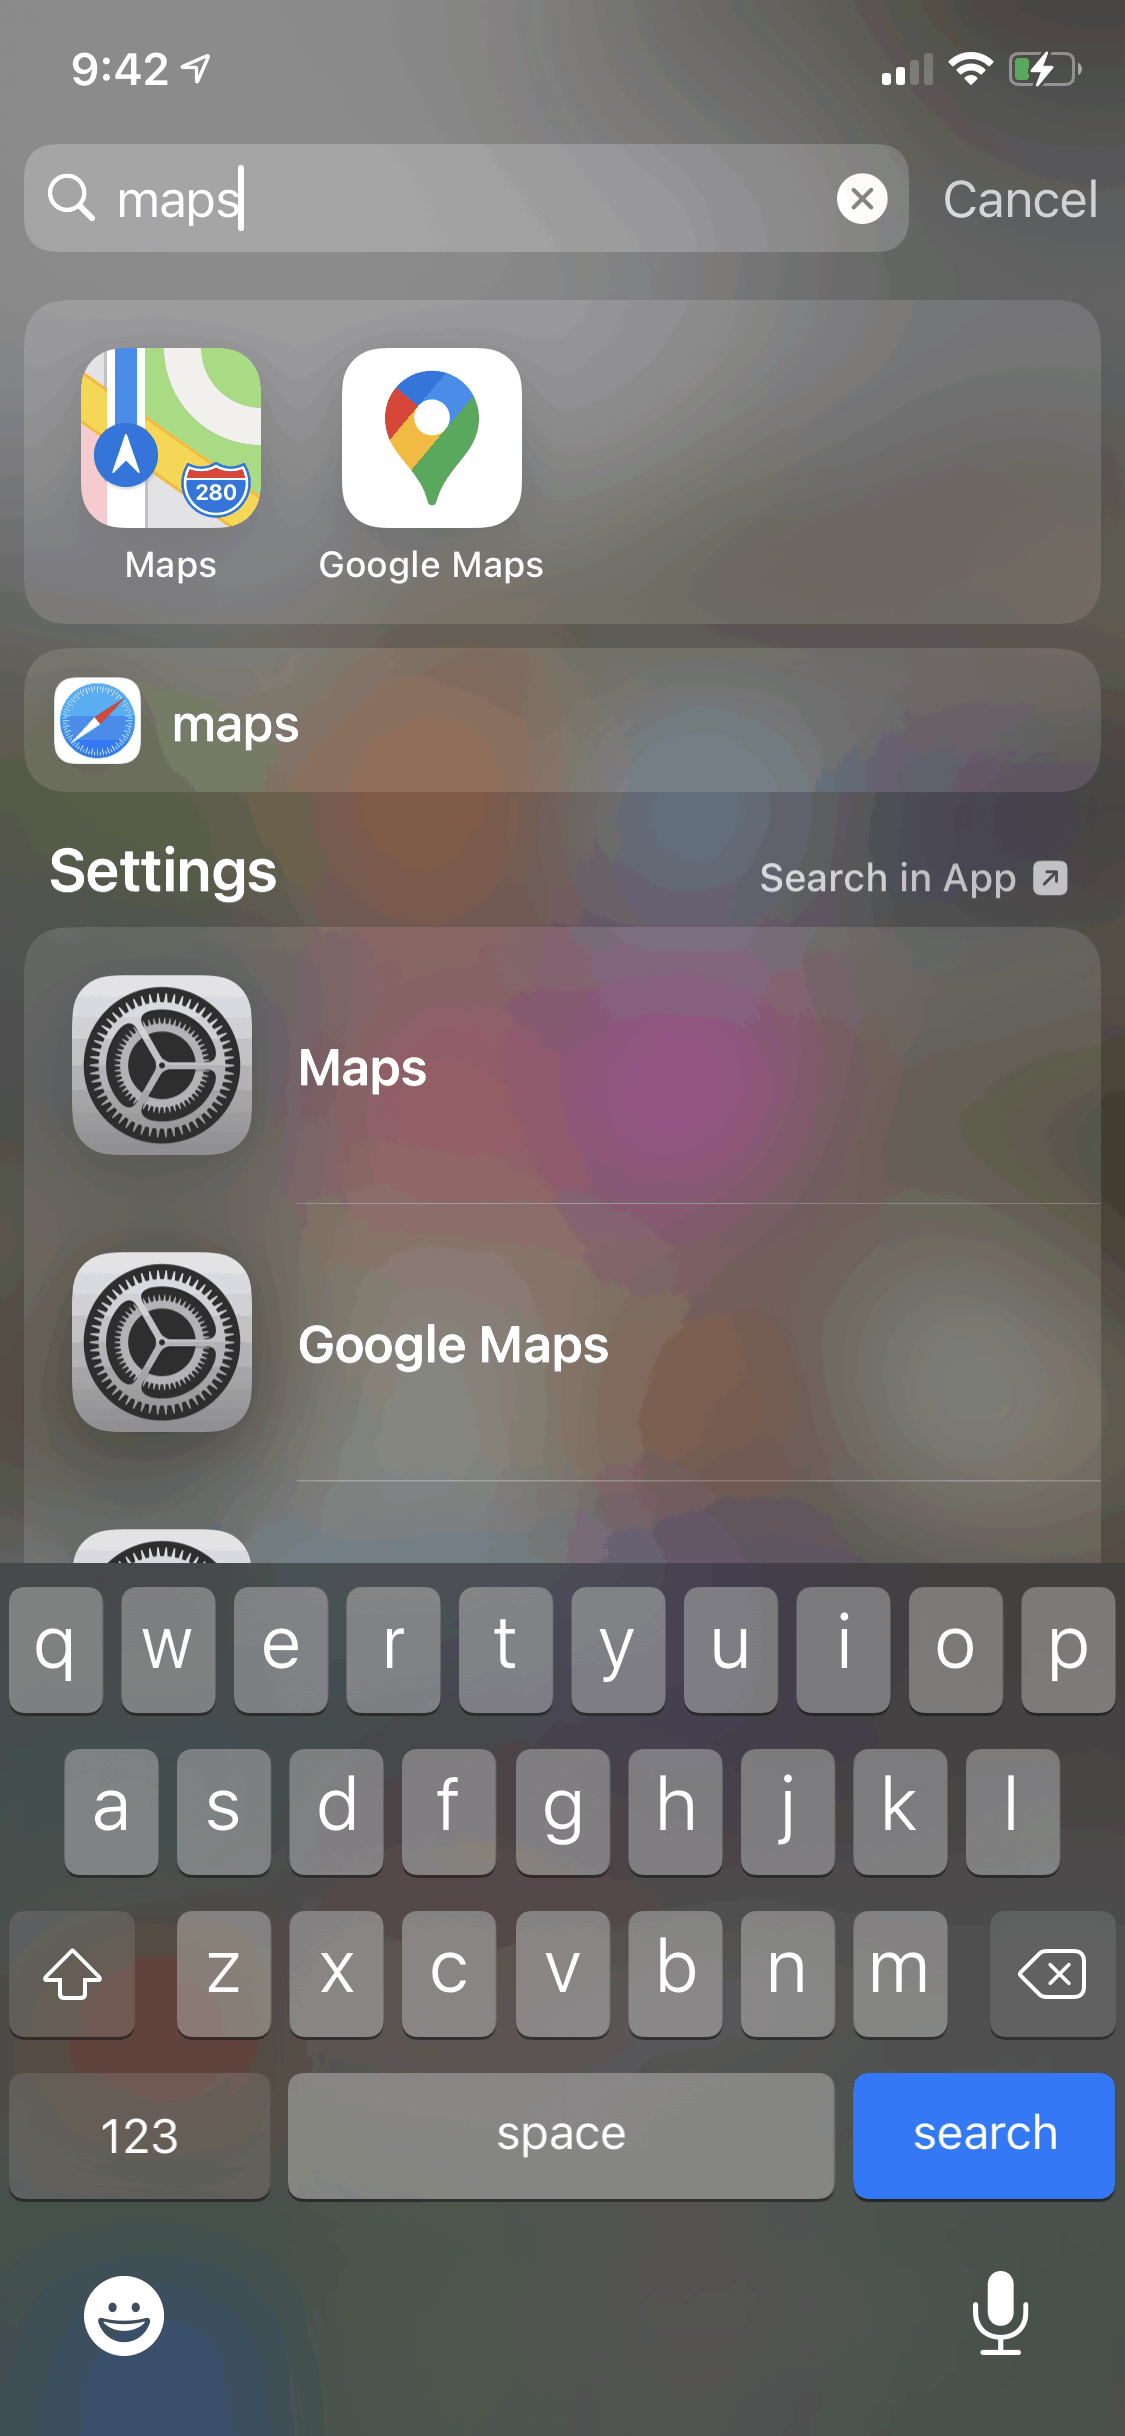 Click "Maps" on the left